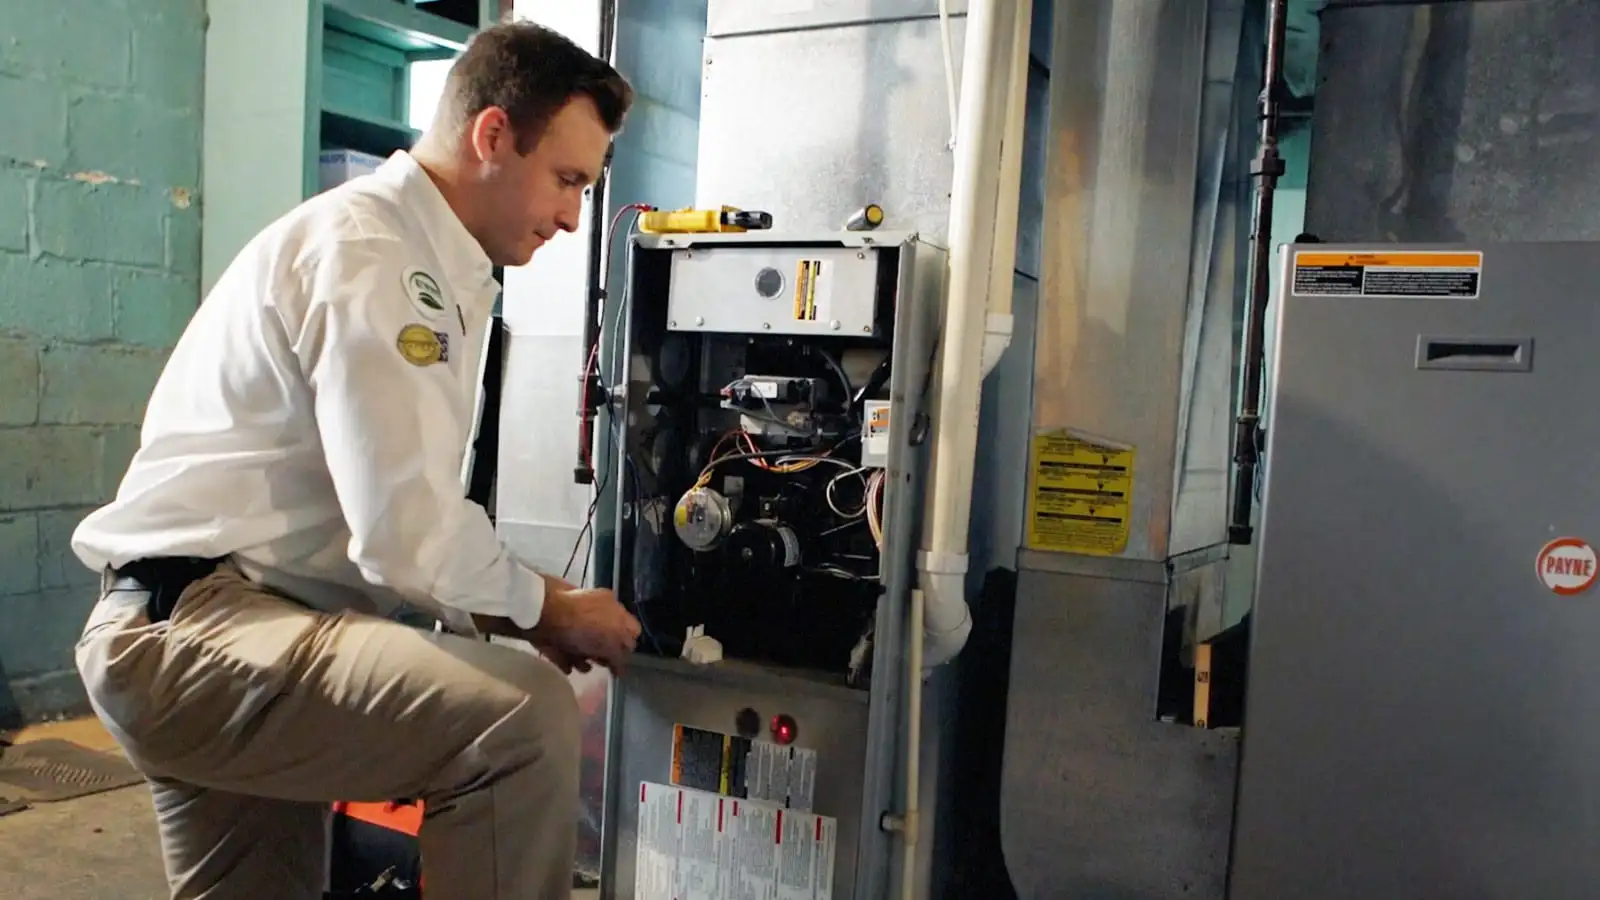 A Reimer technician kneels next to a furnace as they put the finishing touches on a new furnace install.